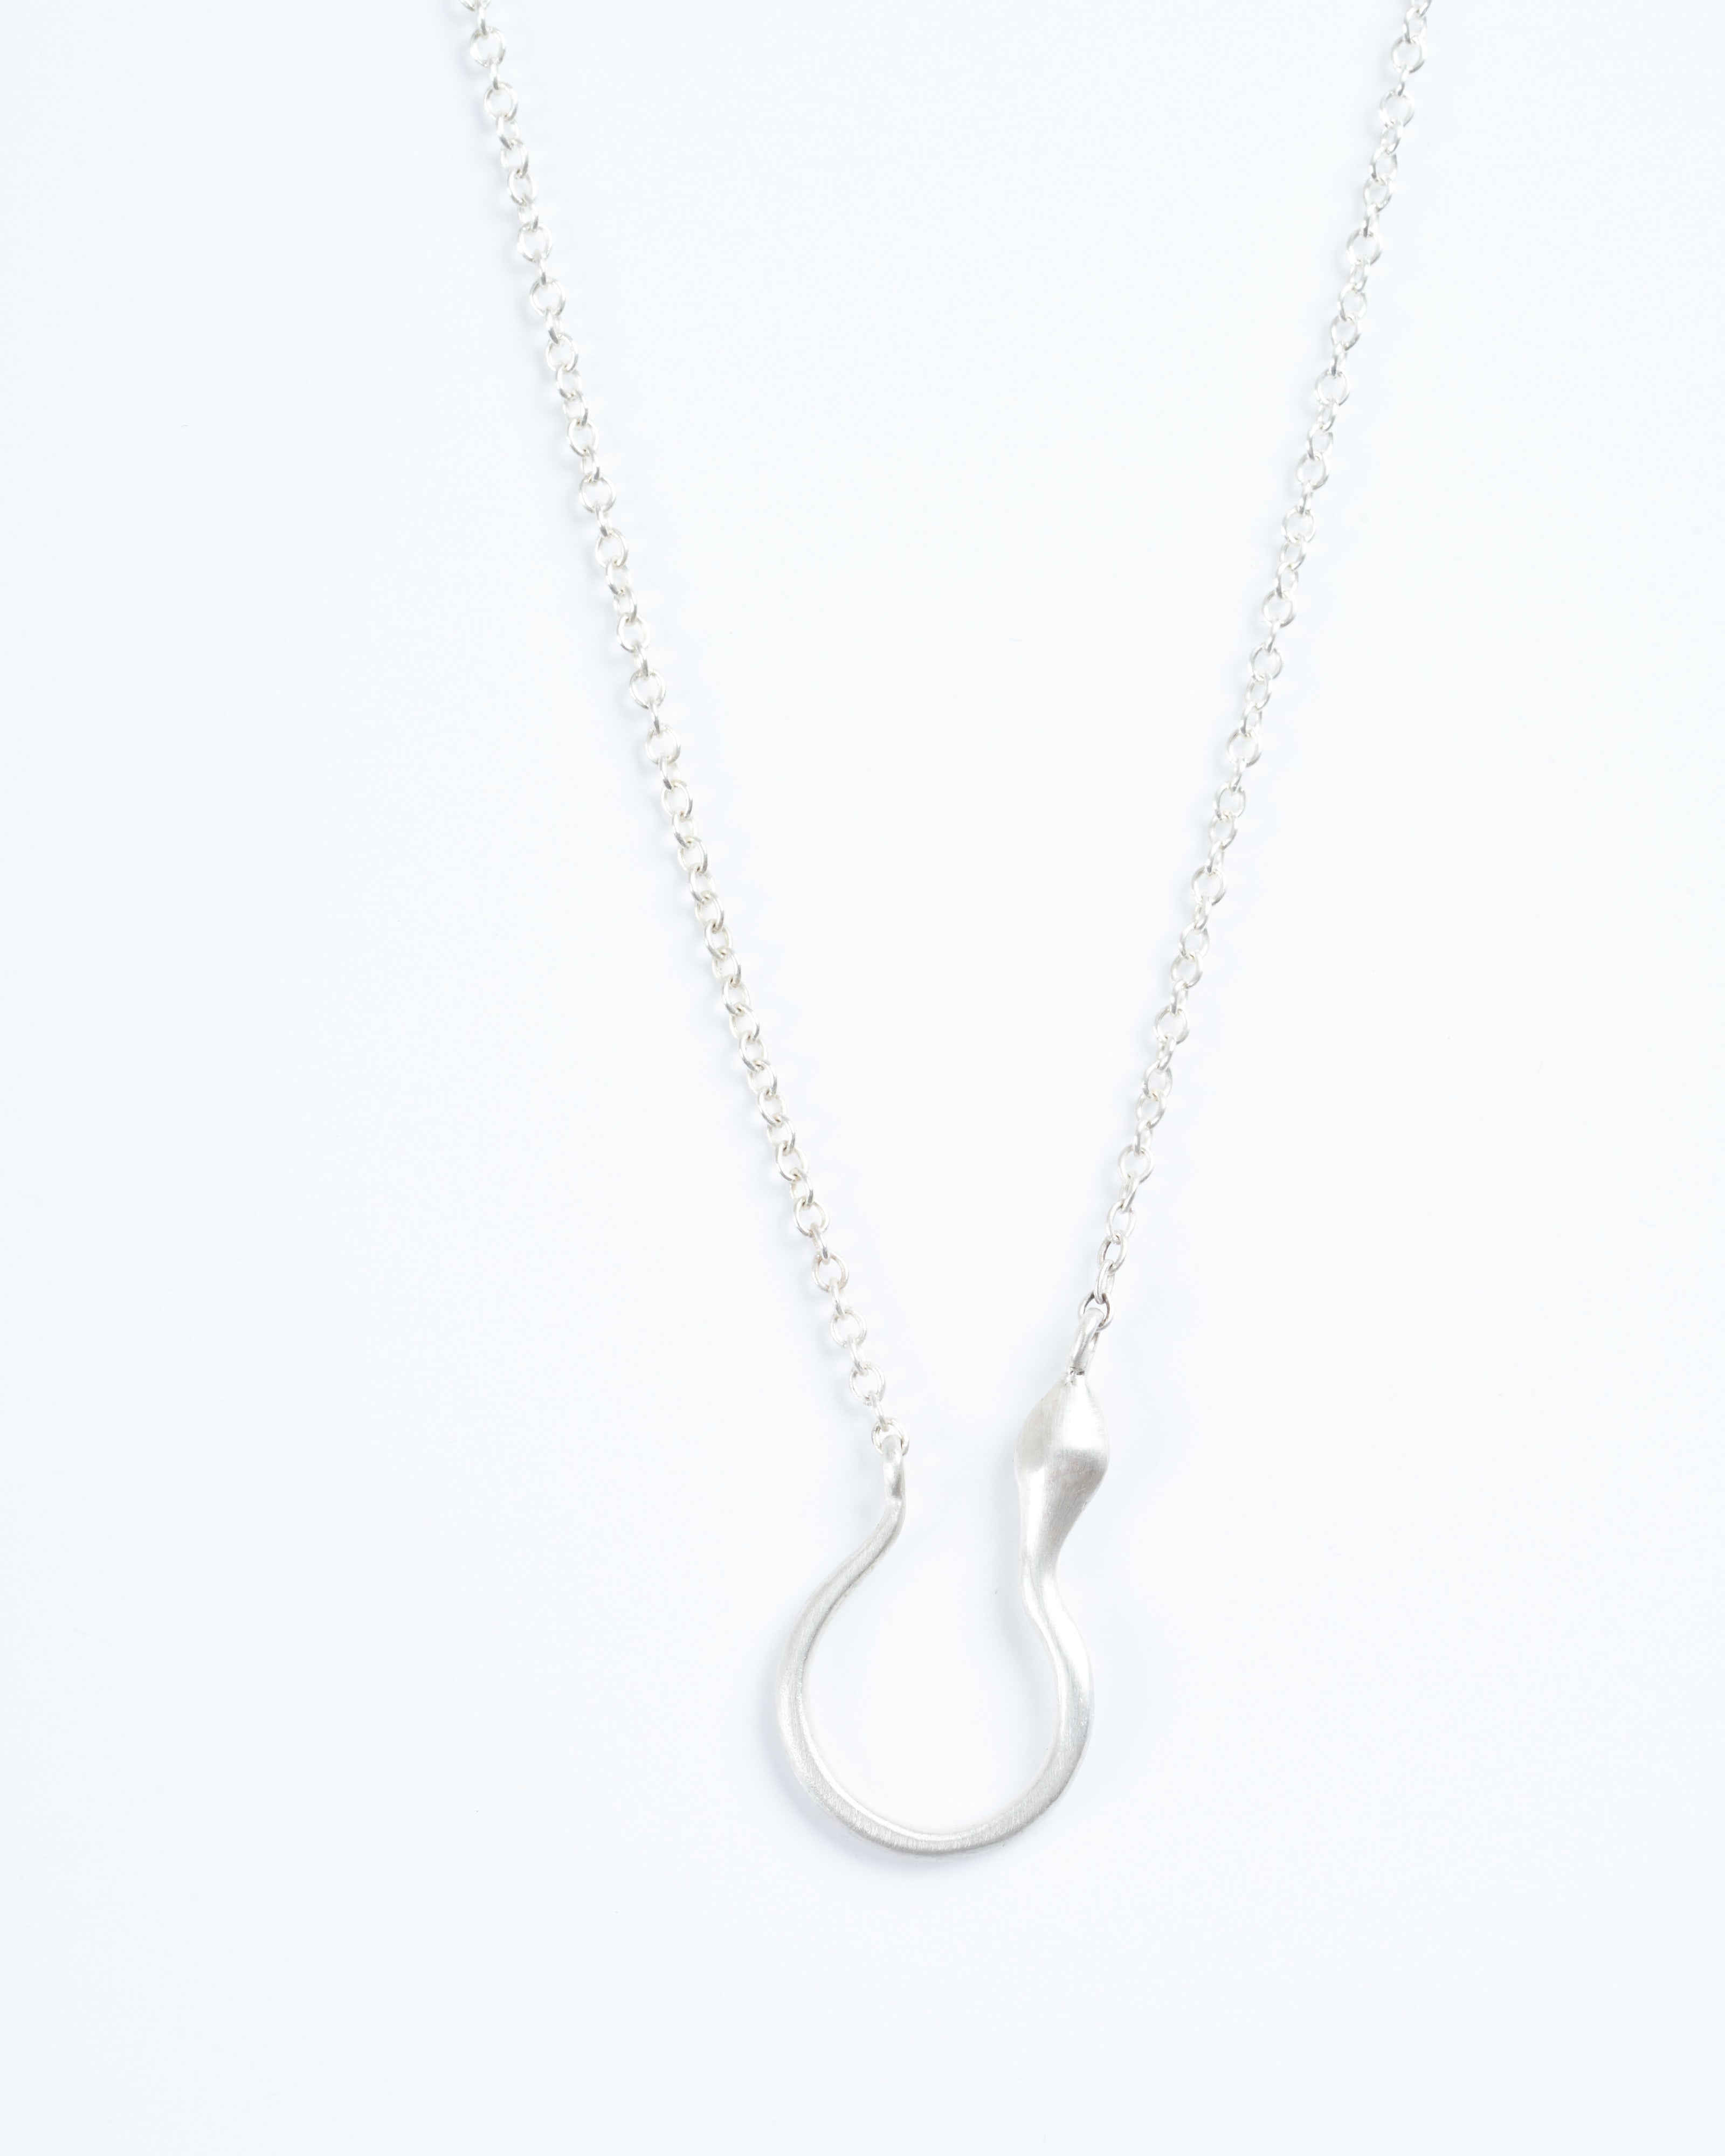 Dan-Yell Sapera Charm Holder Necklace Silver Silver